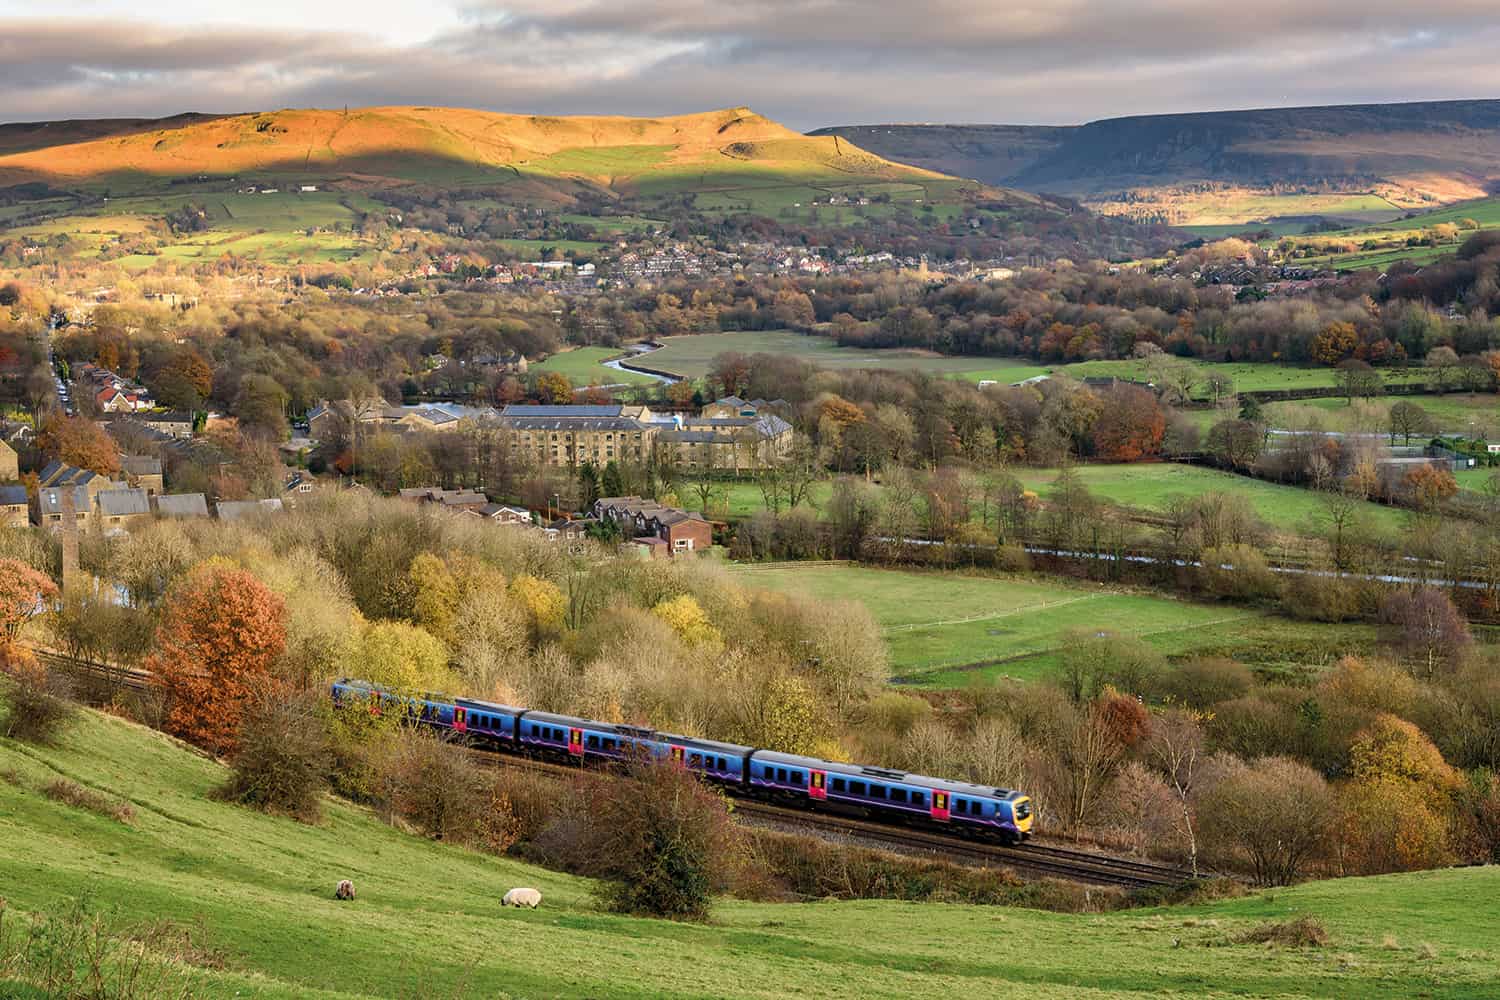 photo of rural scene with train in foreground and village and hills in background